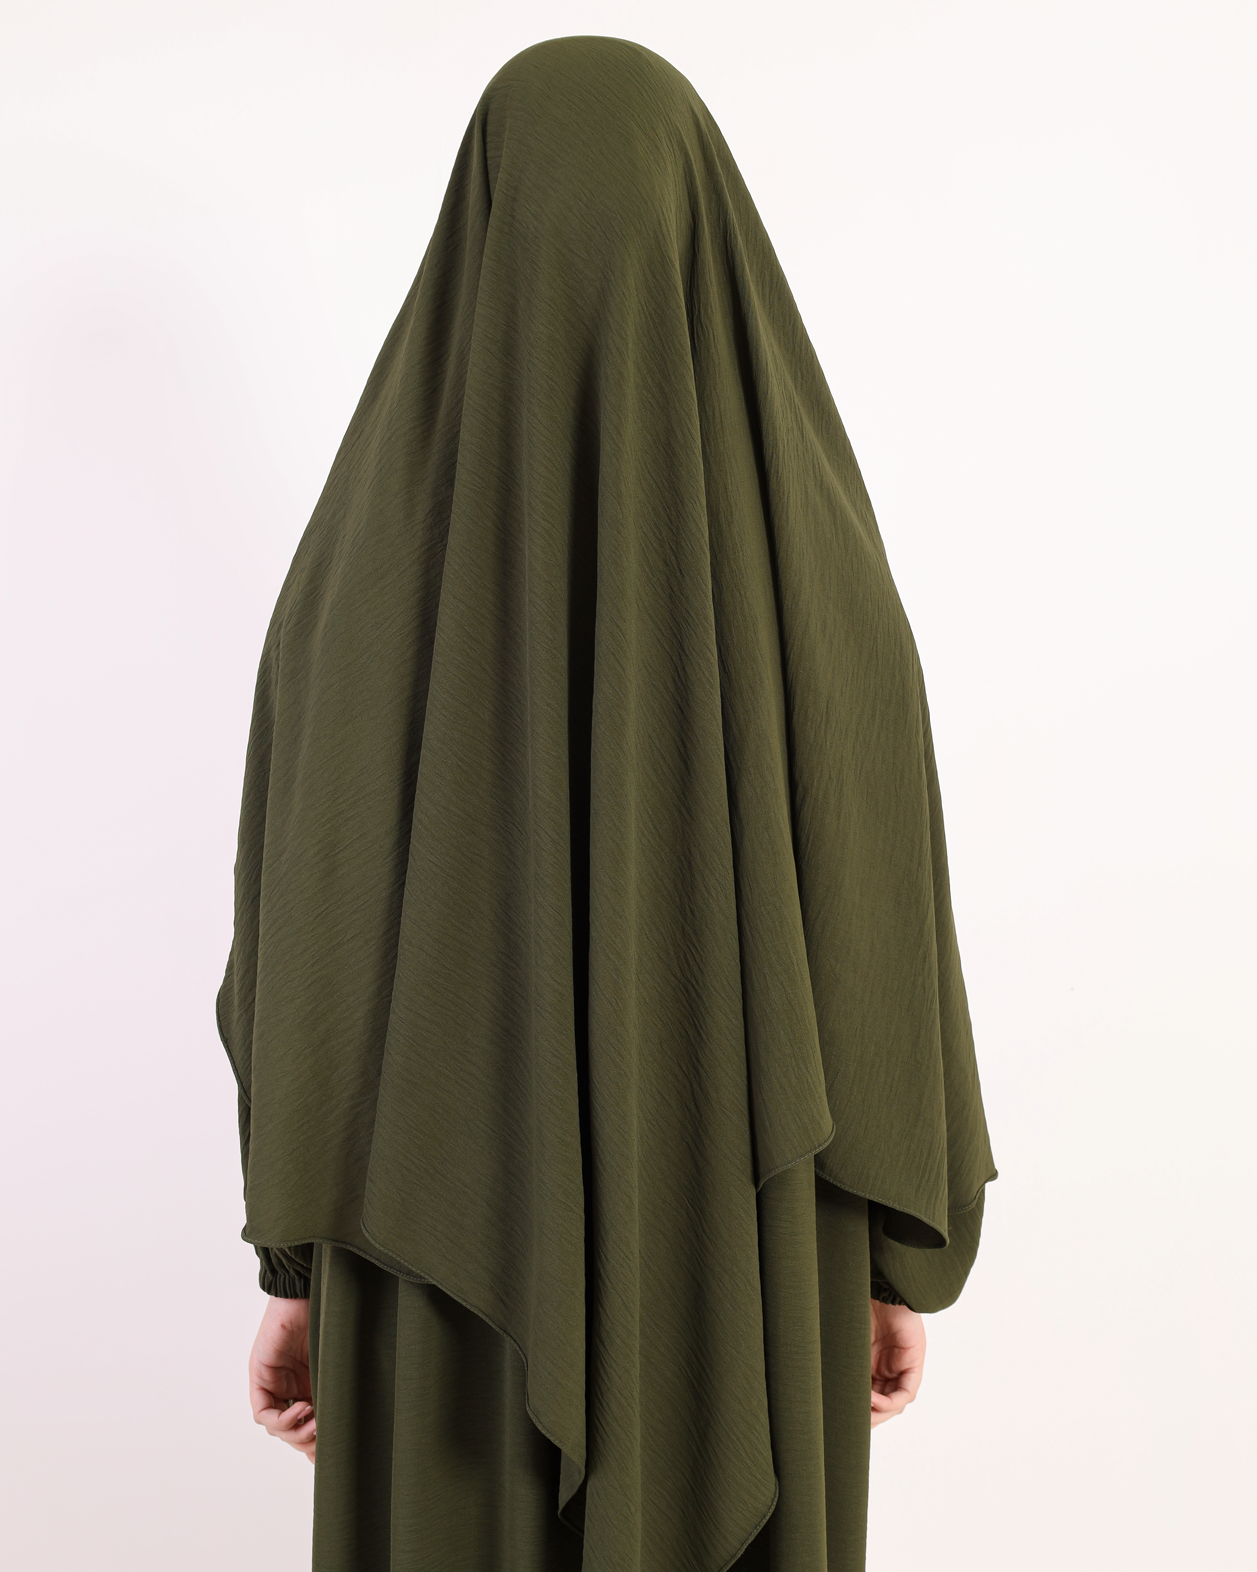 Olive Green French Hijab